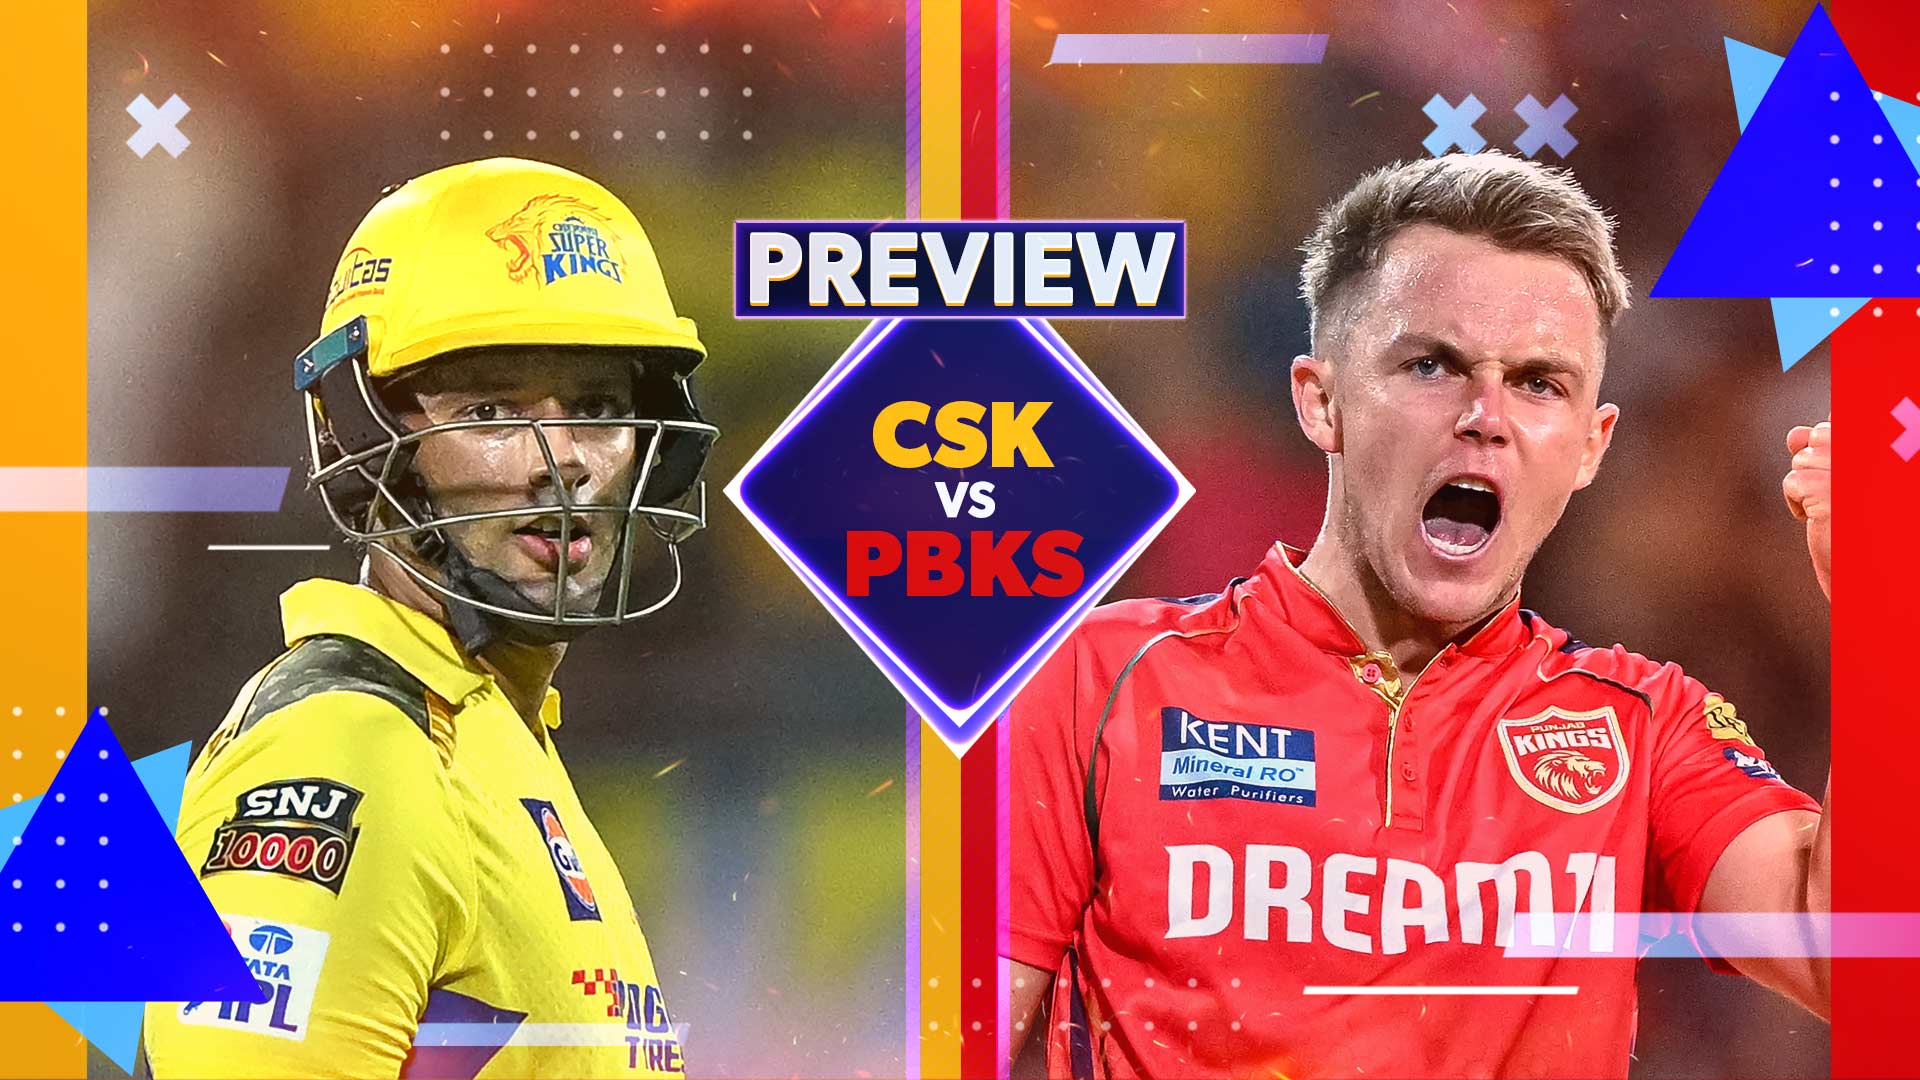 CSK vs PBKS: All You Need to Know